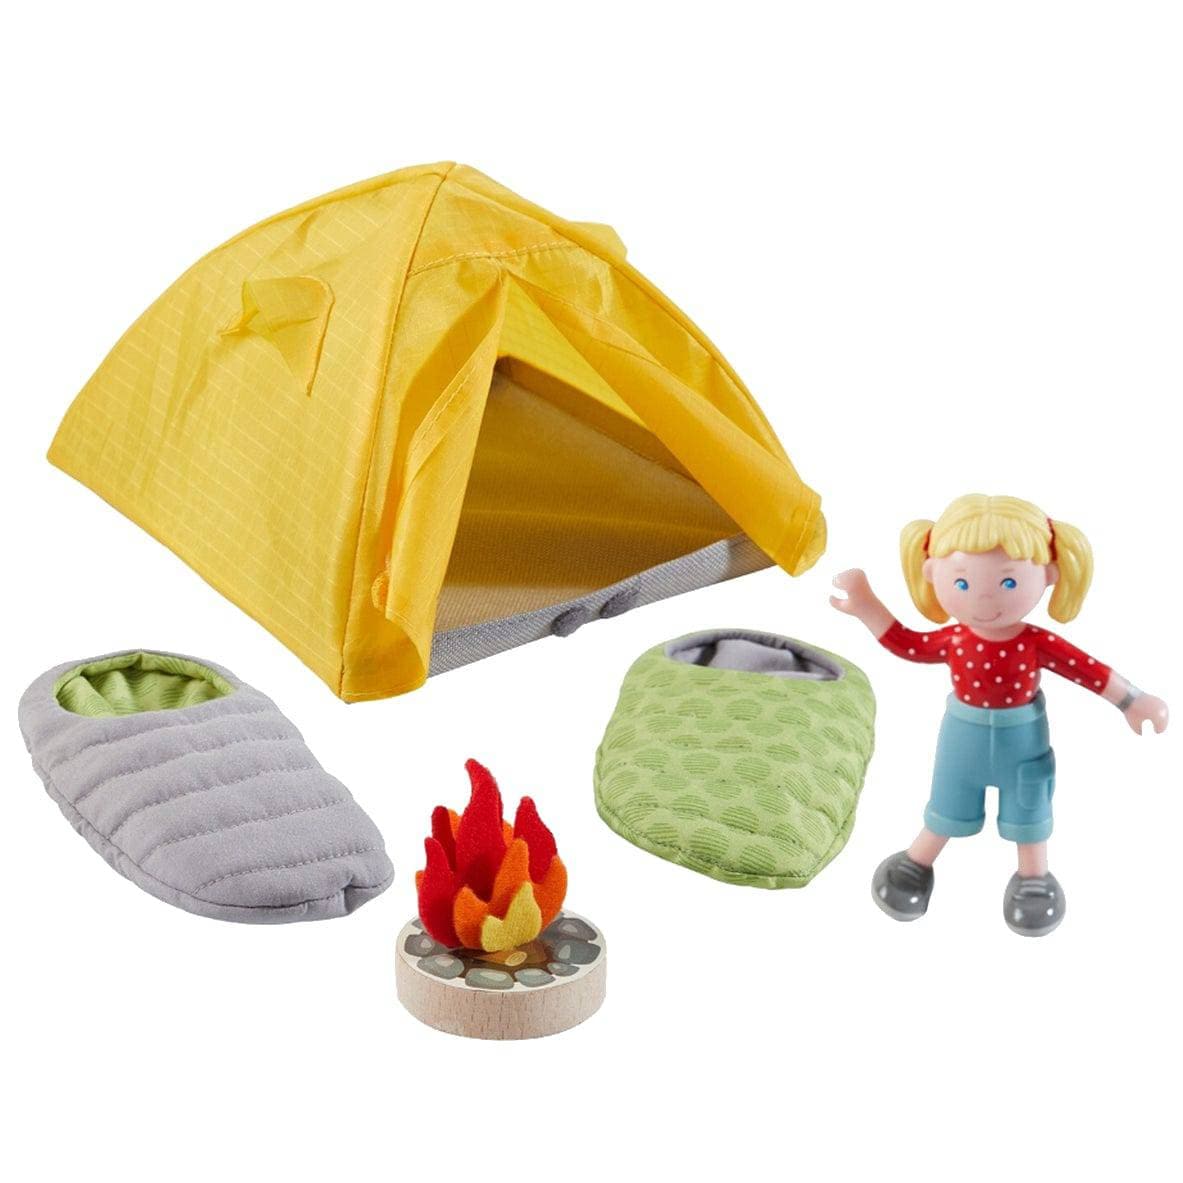 http://www.habausa.com/cdn/shop/products/haba-little-friend-accessories-little-friends-camping-trip-play-set-with-sleeping-bags-28744771141730.jpg?v=1698426550